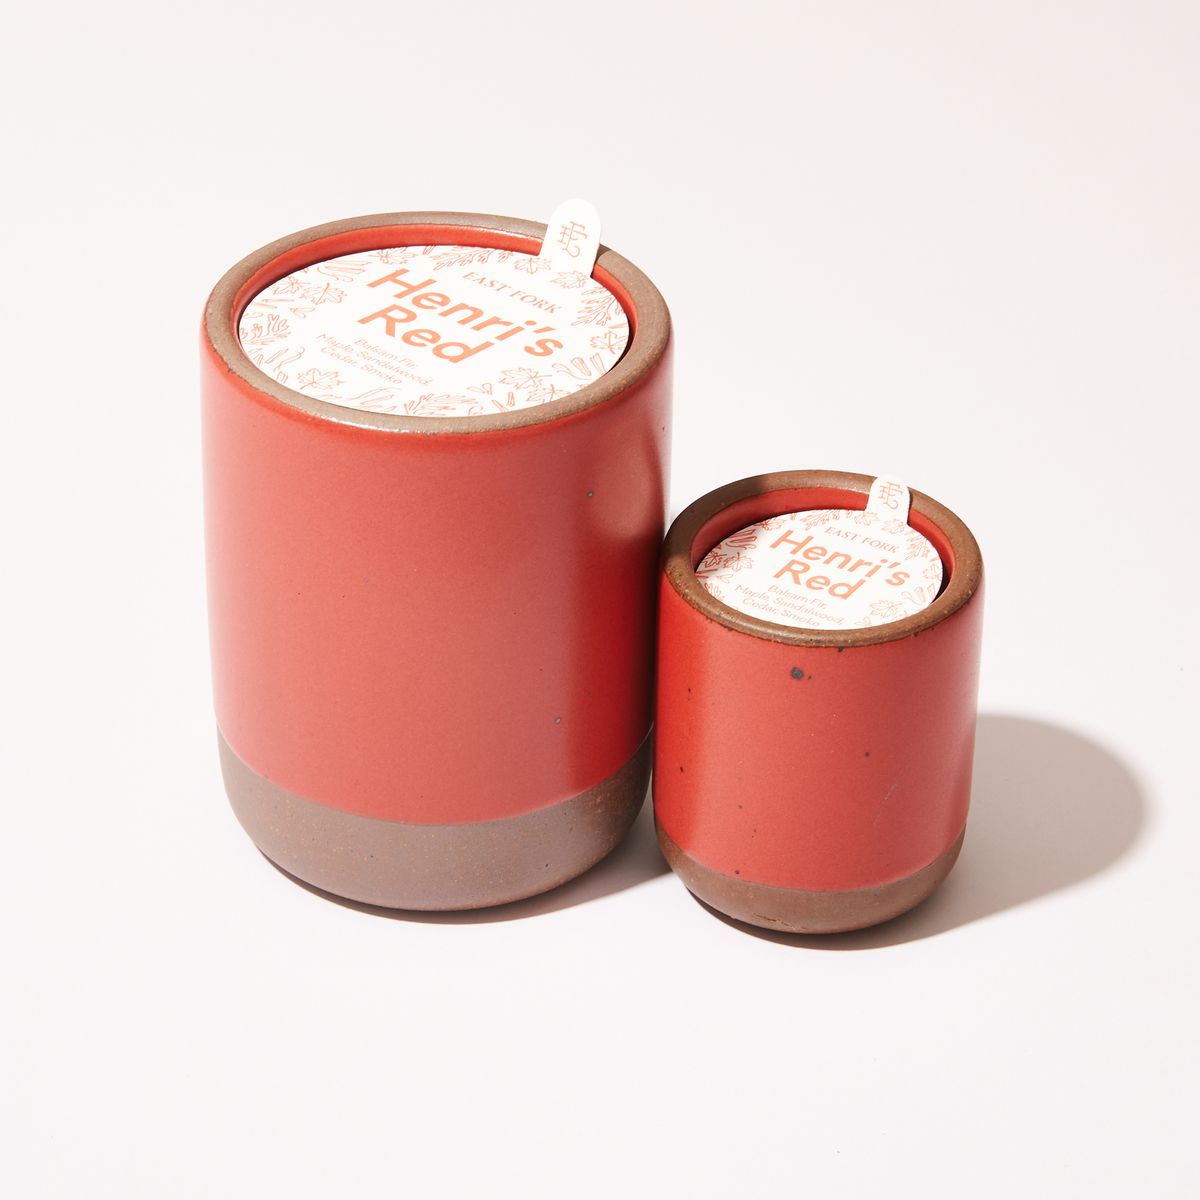 Small and large ceramic vessel next to each other in orange-red color with candles inside each. On top of each is a packaging label sitting that reads "Henri's Red"